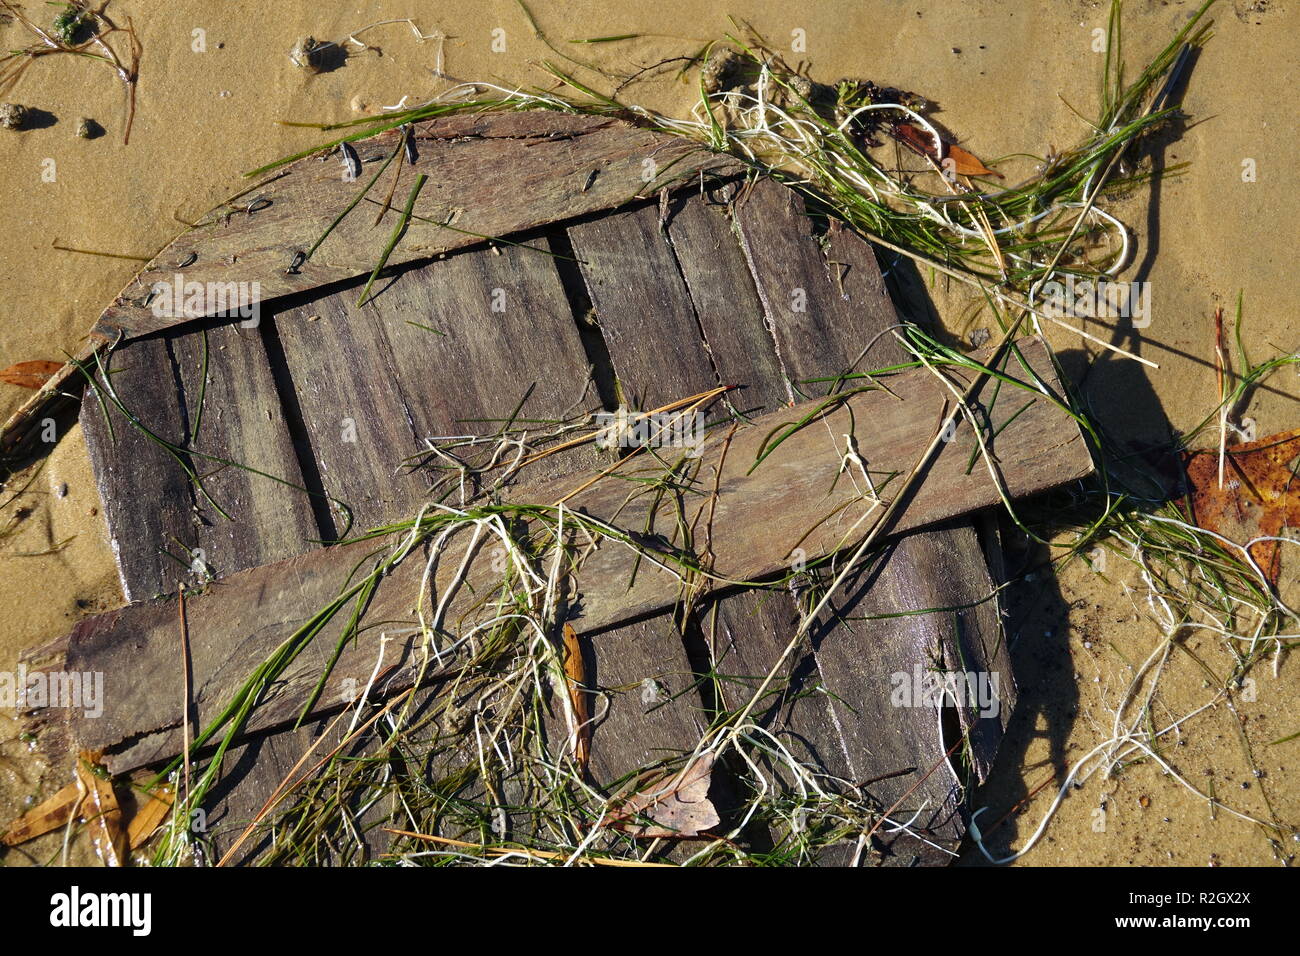 Waterman's bushel basket lid on beach partial covered with eel grass Stock Photo